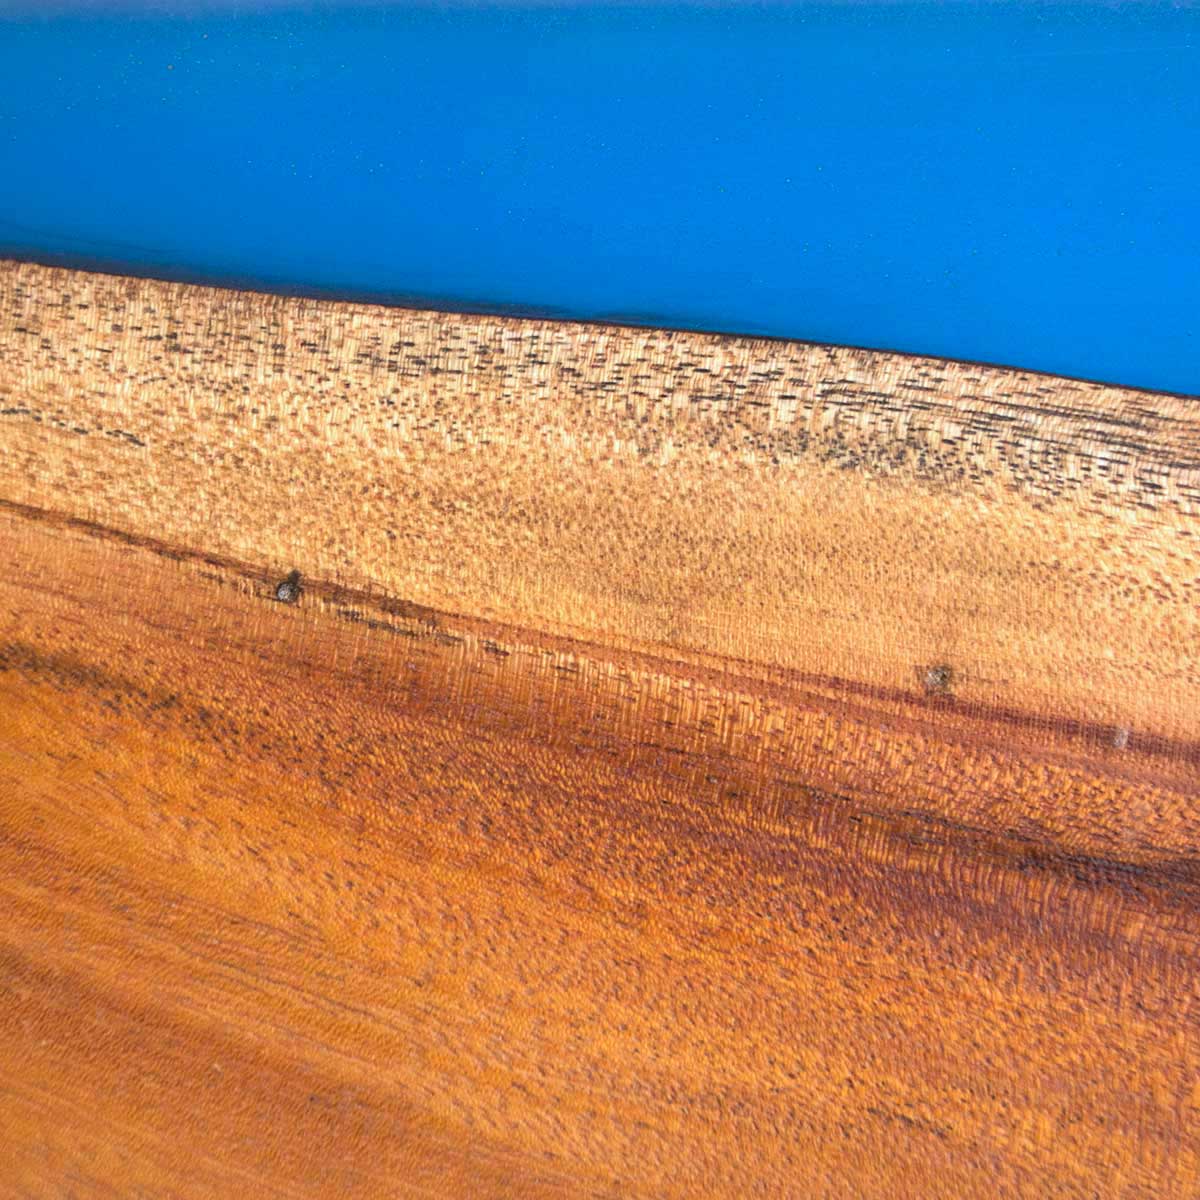 Live edge Cuban Mahogany wood with translucent bright blue epoxy resin, a detailed close up image to show the natural wood grain